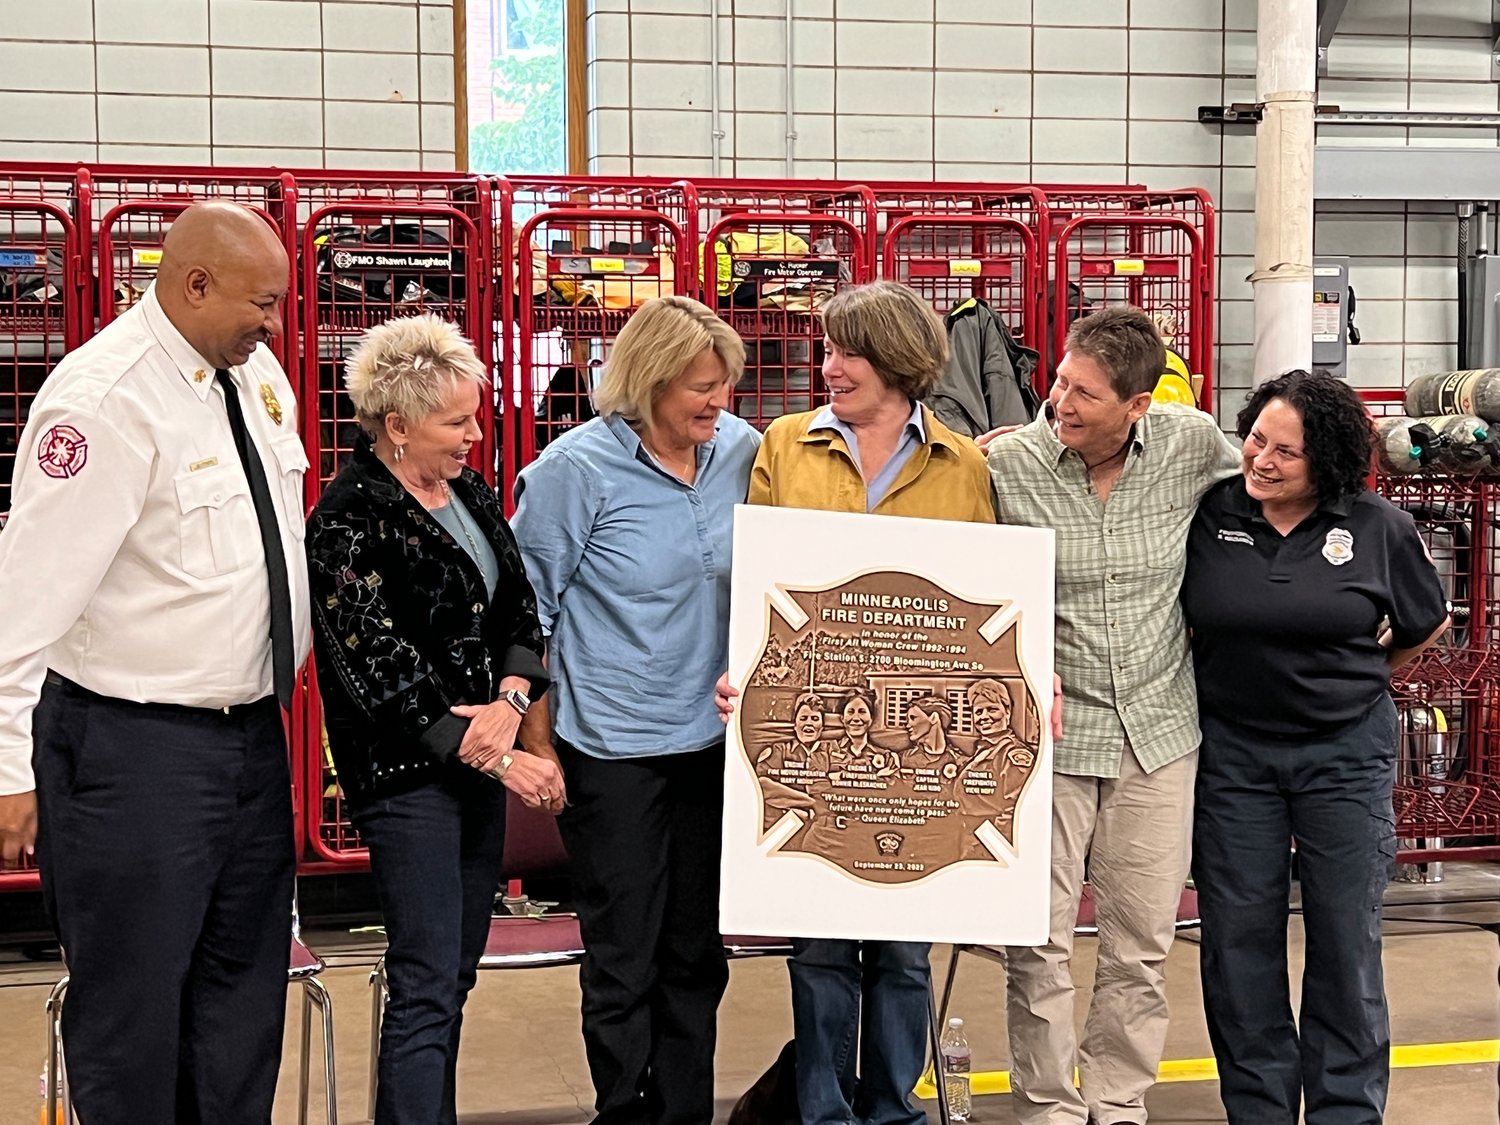 Minneapolis Fire Chief Bryan Tyner (at left) and Sherri Waisanen of the Women’s Firefighter Association (at right) present Vicki Hoff, Mary Mohn, Jean Kidd, Bonnie Bleskachek (center left to right) with a plaque honoring their place in history as the Minneapolis Fire Department’s first all-women crew.